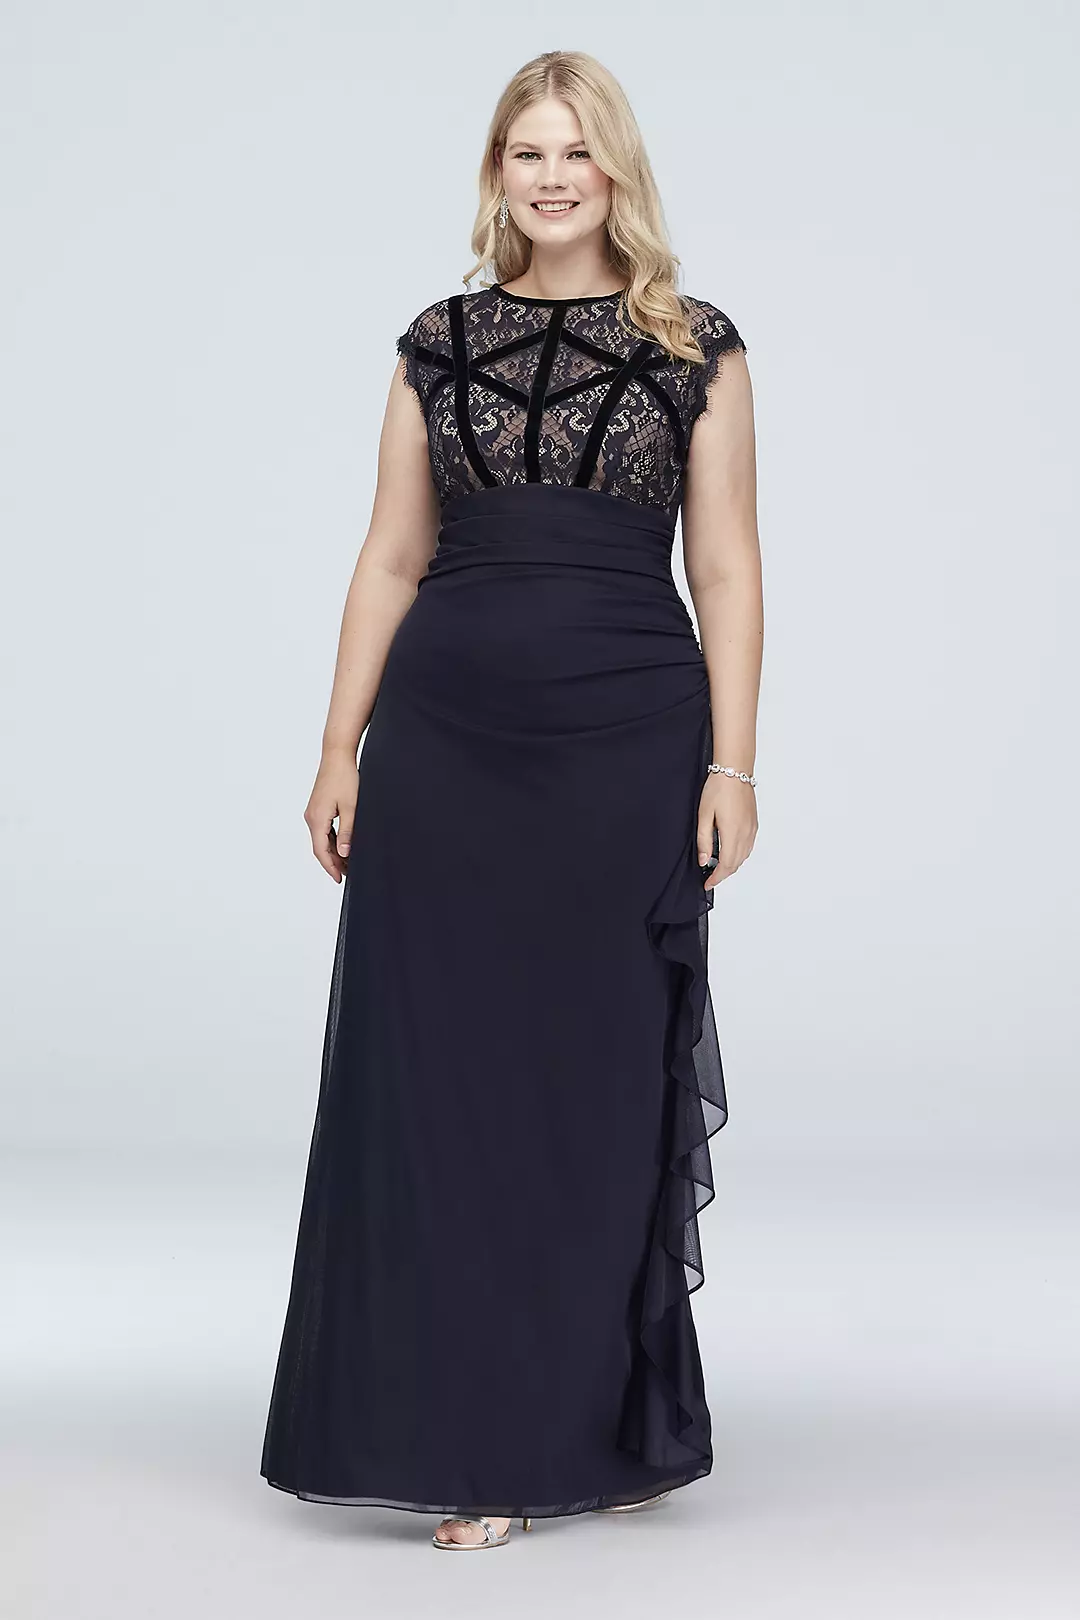 Velvet-Banded Lace and Chiffon Cap Sleeve Gown Image